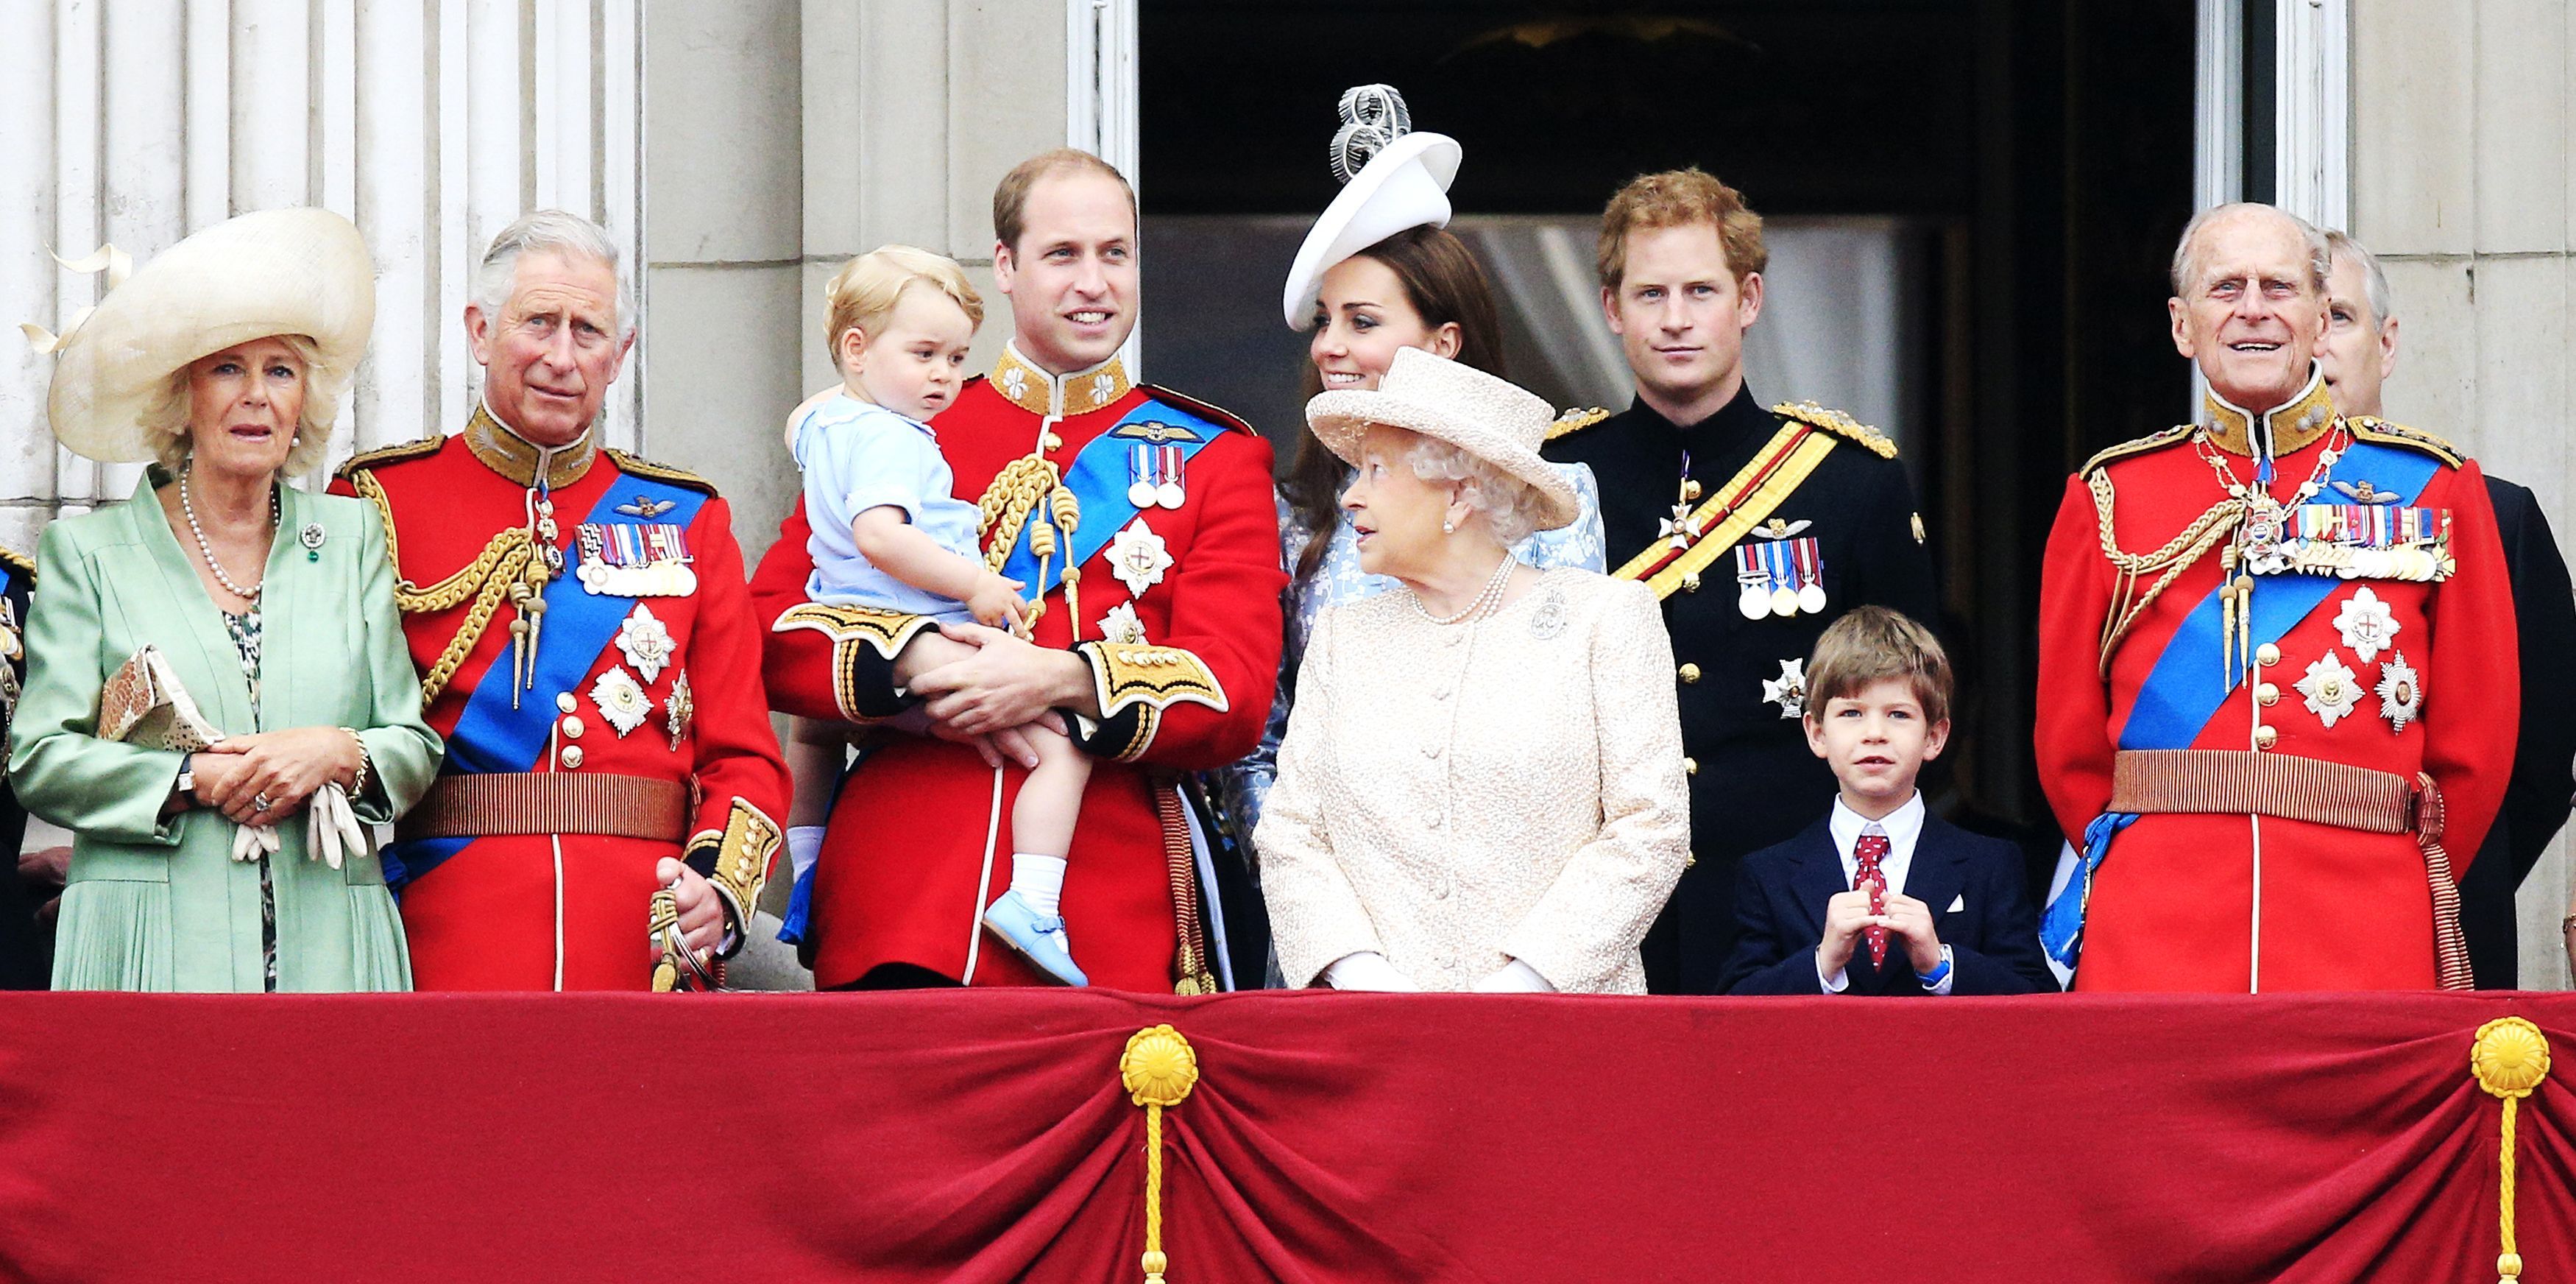 The Duchess of Cornwall, the Prince of Wales, Prince George, the Duke and Duchess of Cambridge, Queen Elizabeth II, Prince Harry, James Viscount Severn, the Duke of <a href=